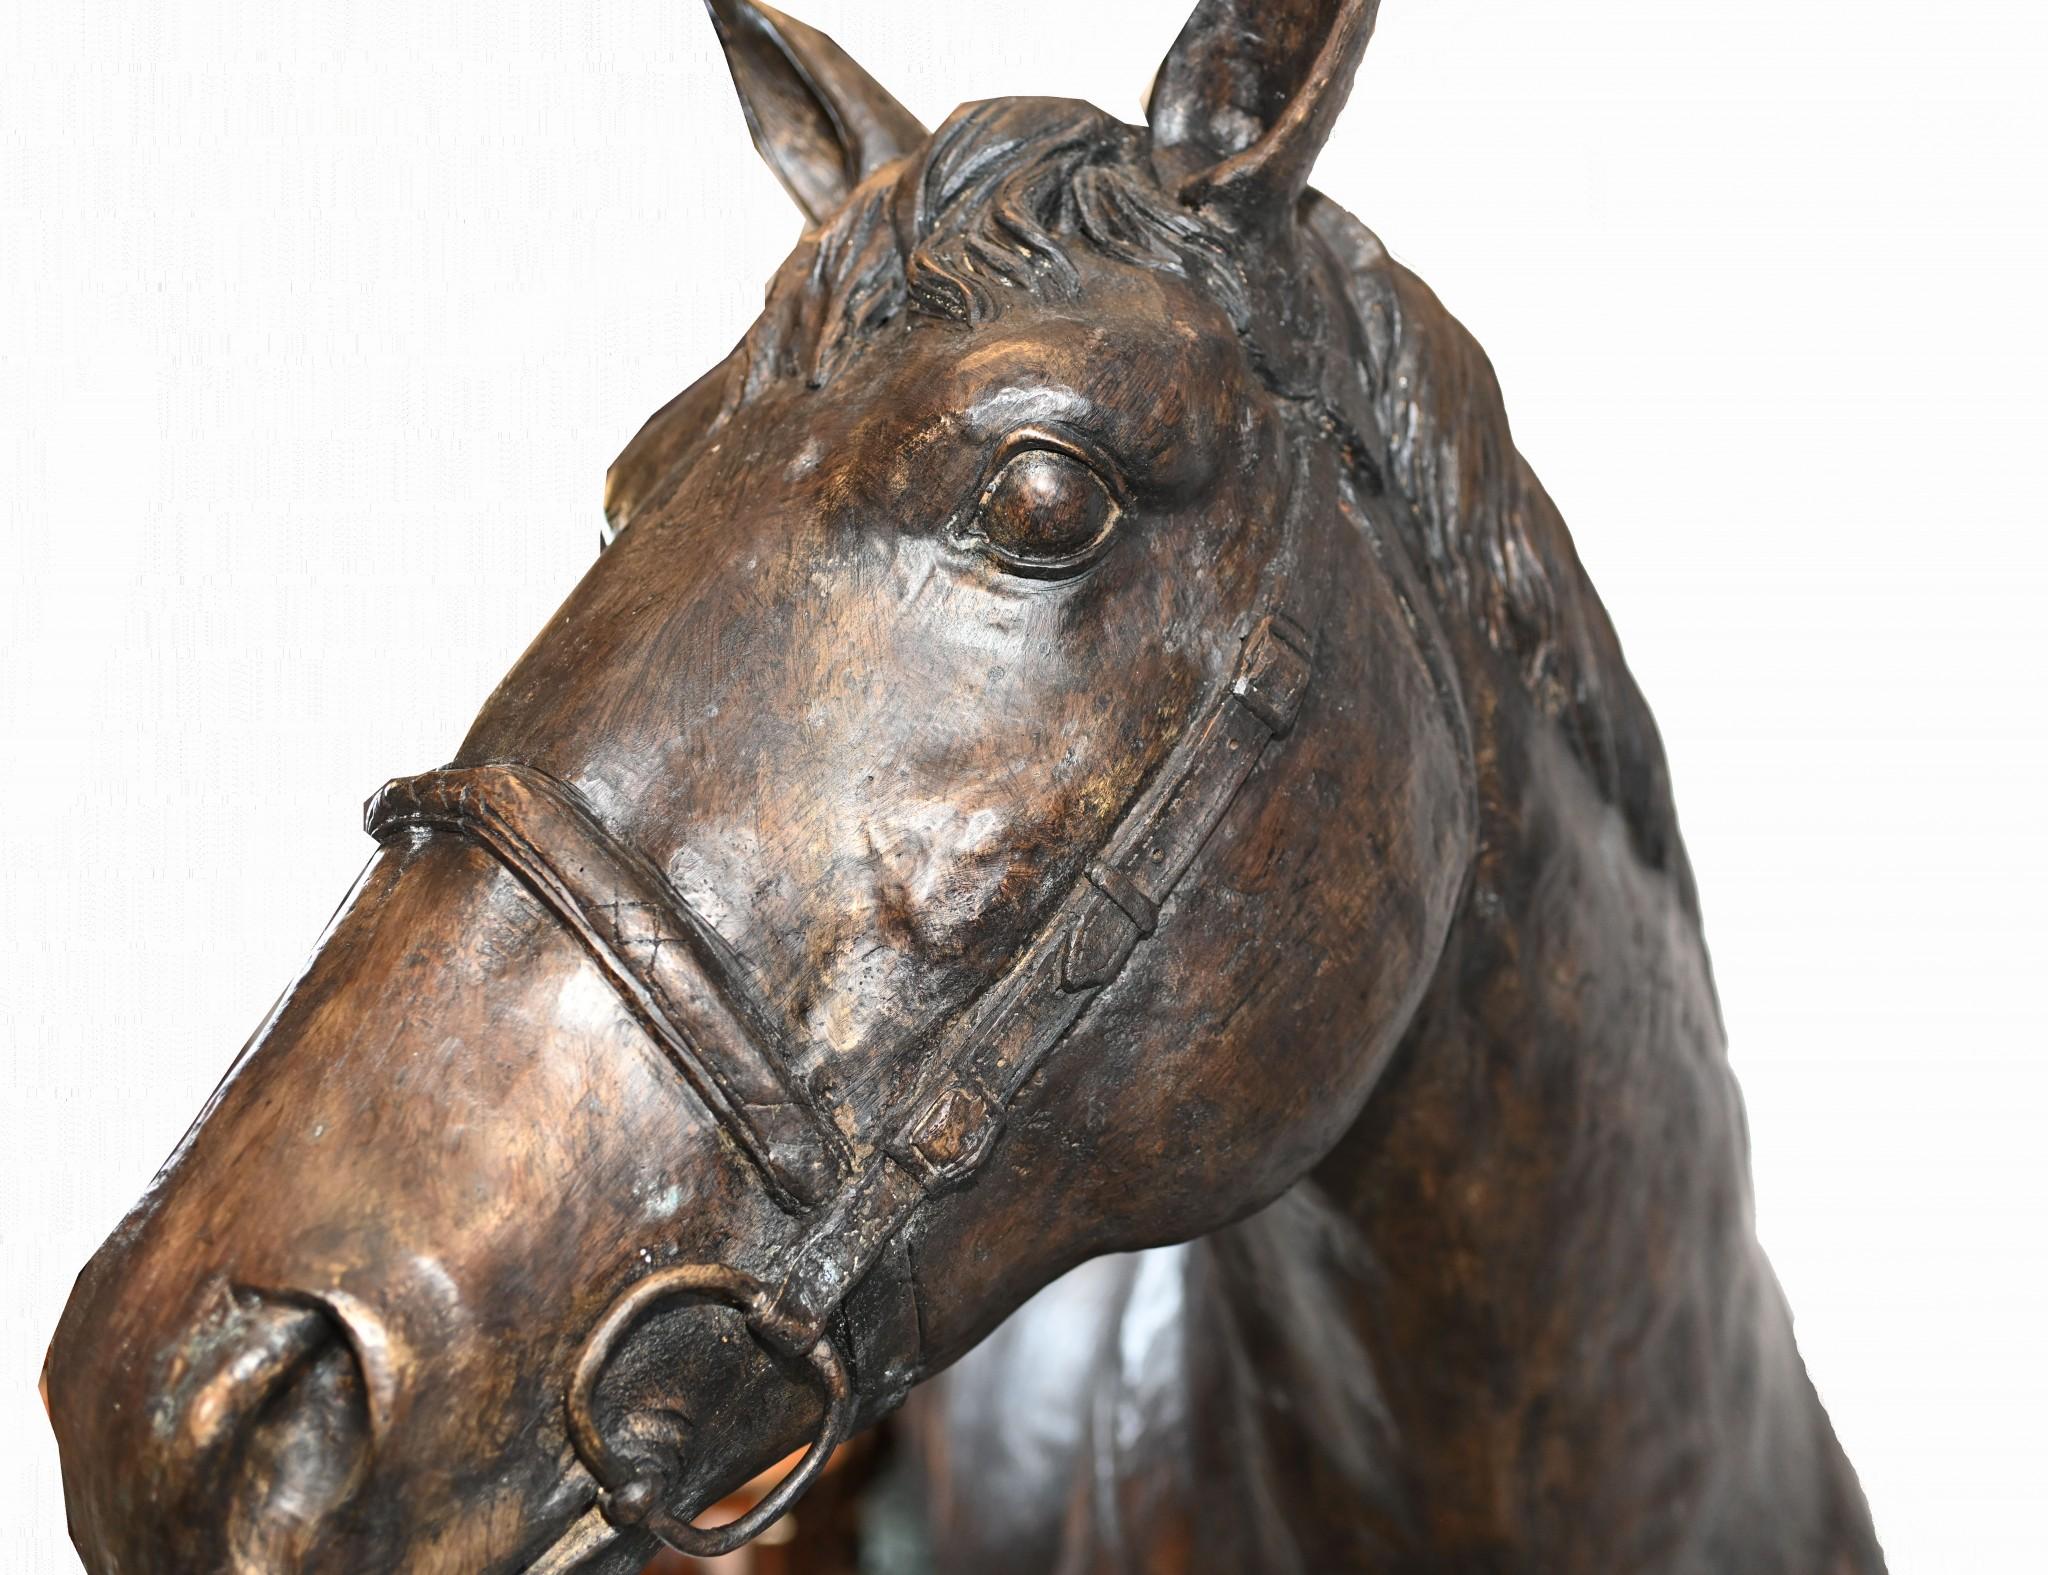 - Wonderful lifesize French bronze horse
- Stands in at 7 feet tall - 213 cm - so massive
- Of course being bronze this can live outside with no fear of rusting
- Artist has really captured the beauty to the horse, check out features like the